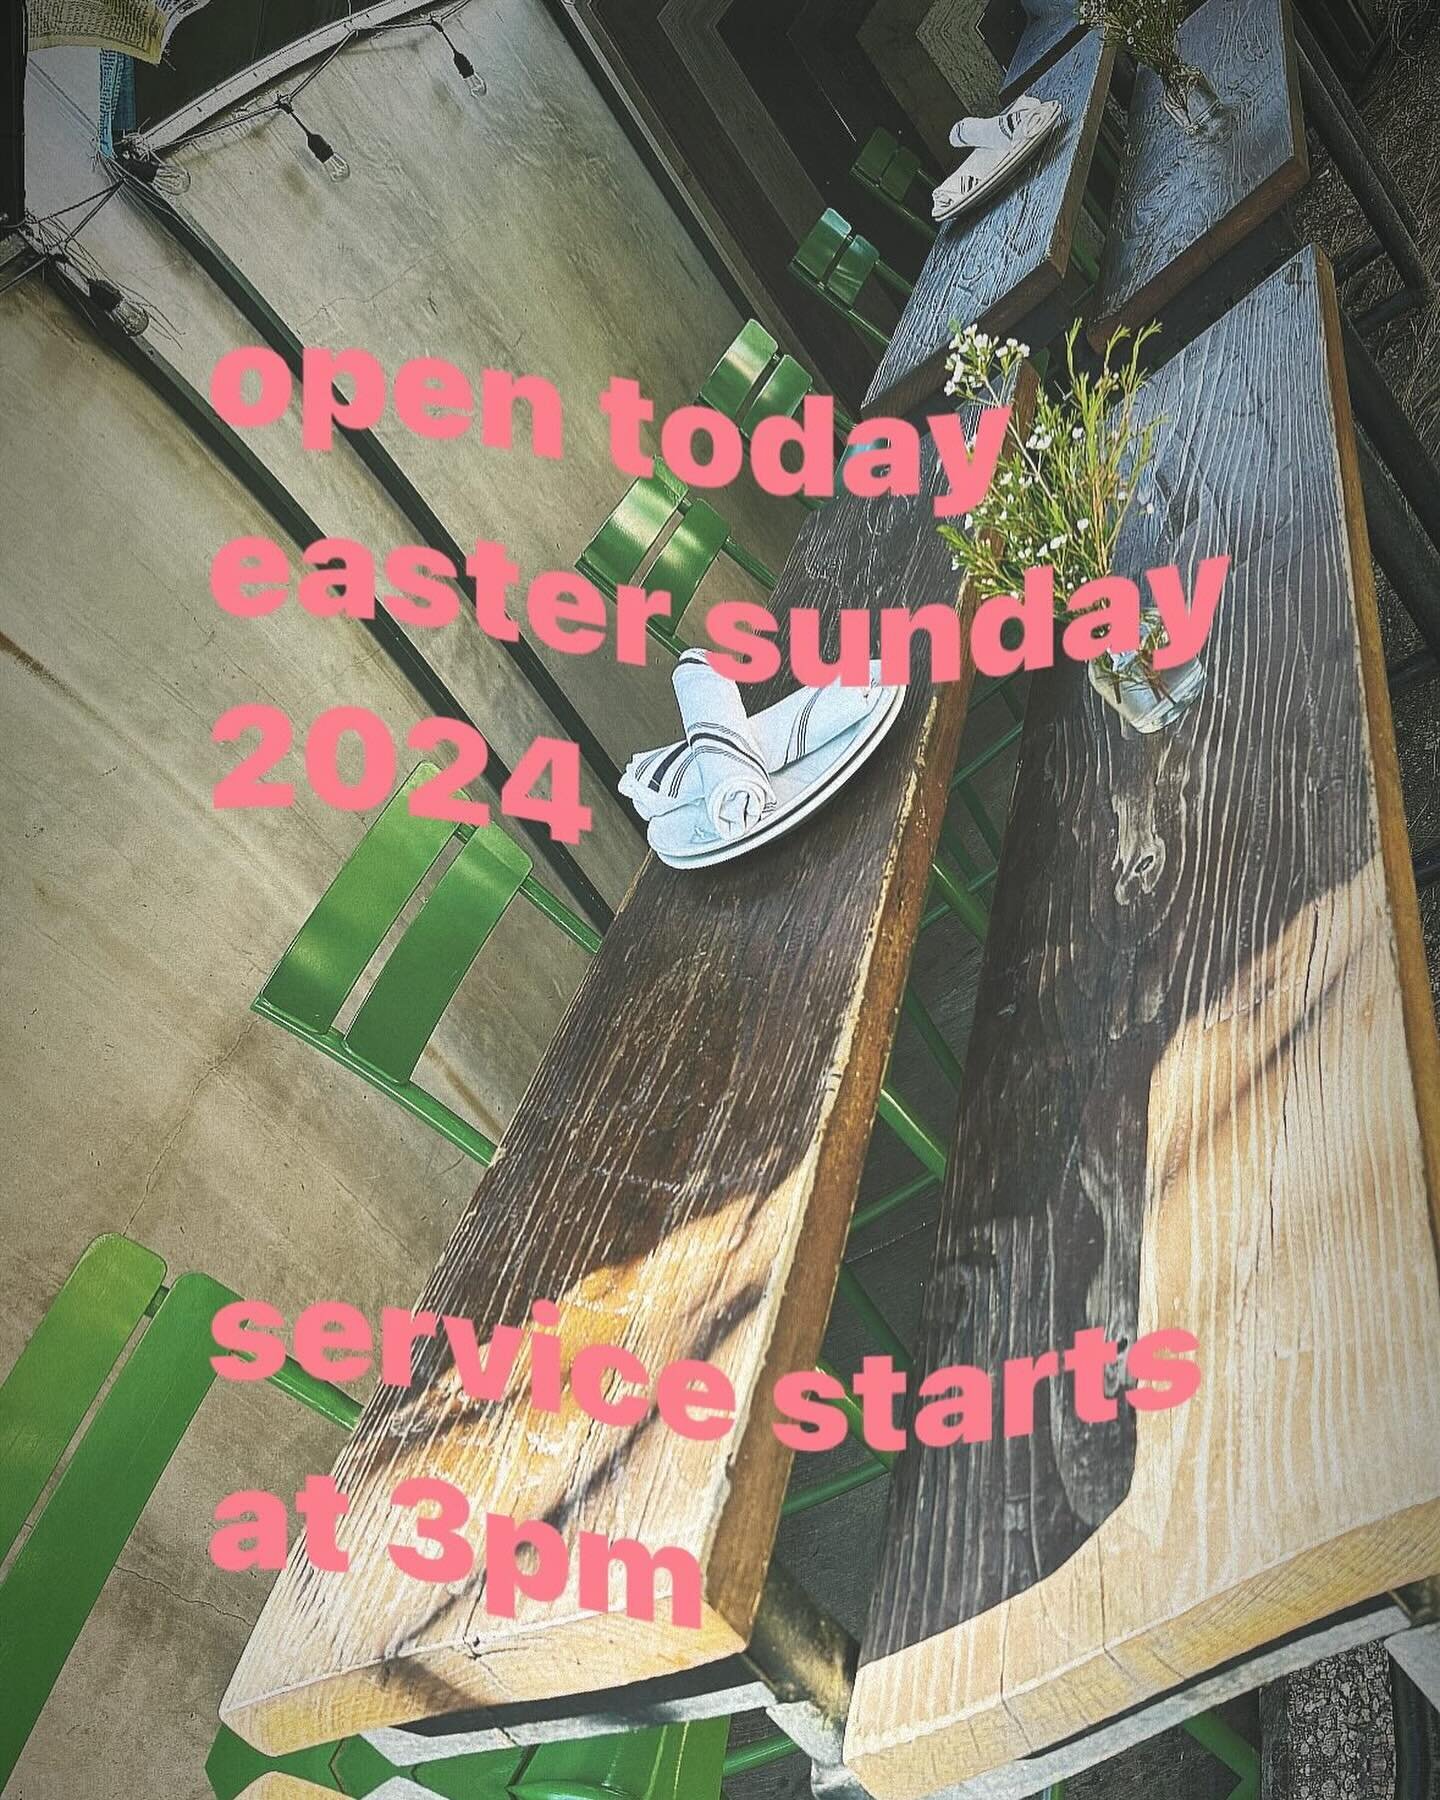 🐣 OPEN TODAY 💡
We are in the kitchen today prepping out for our pizza party for all who want to gather and celebrate this Easter Sunday with us. We&rsquo;d love to hang with you, we are all in!
🚪 open at 3pm until 9pm tonight. 
Happy Easter 🐰
&bu